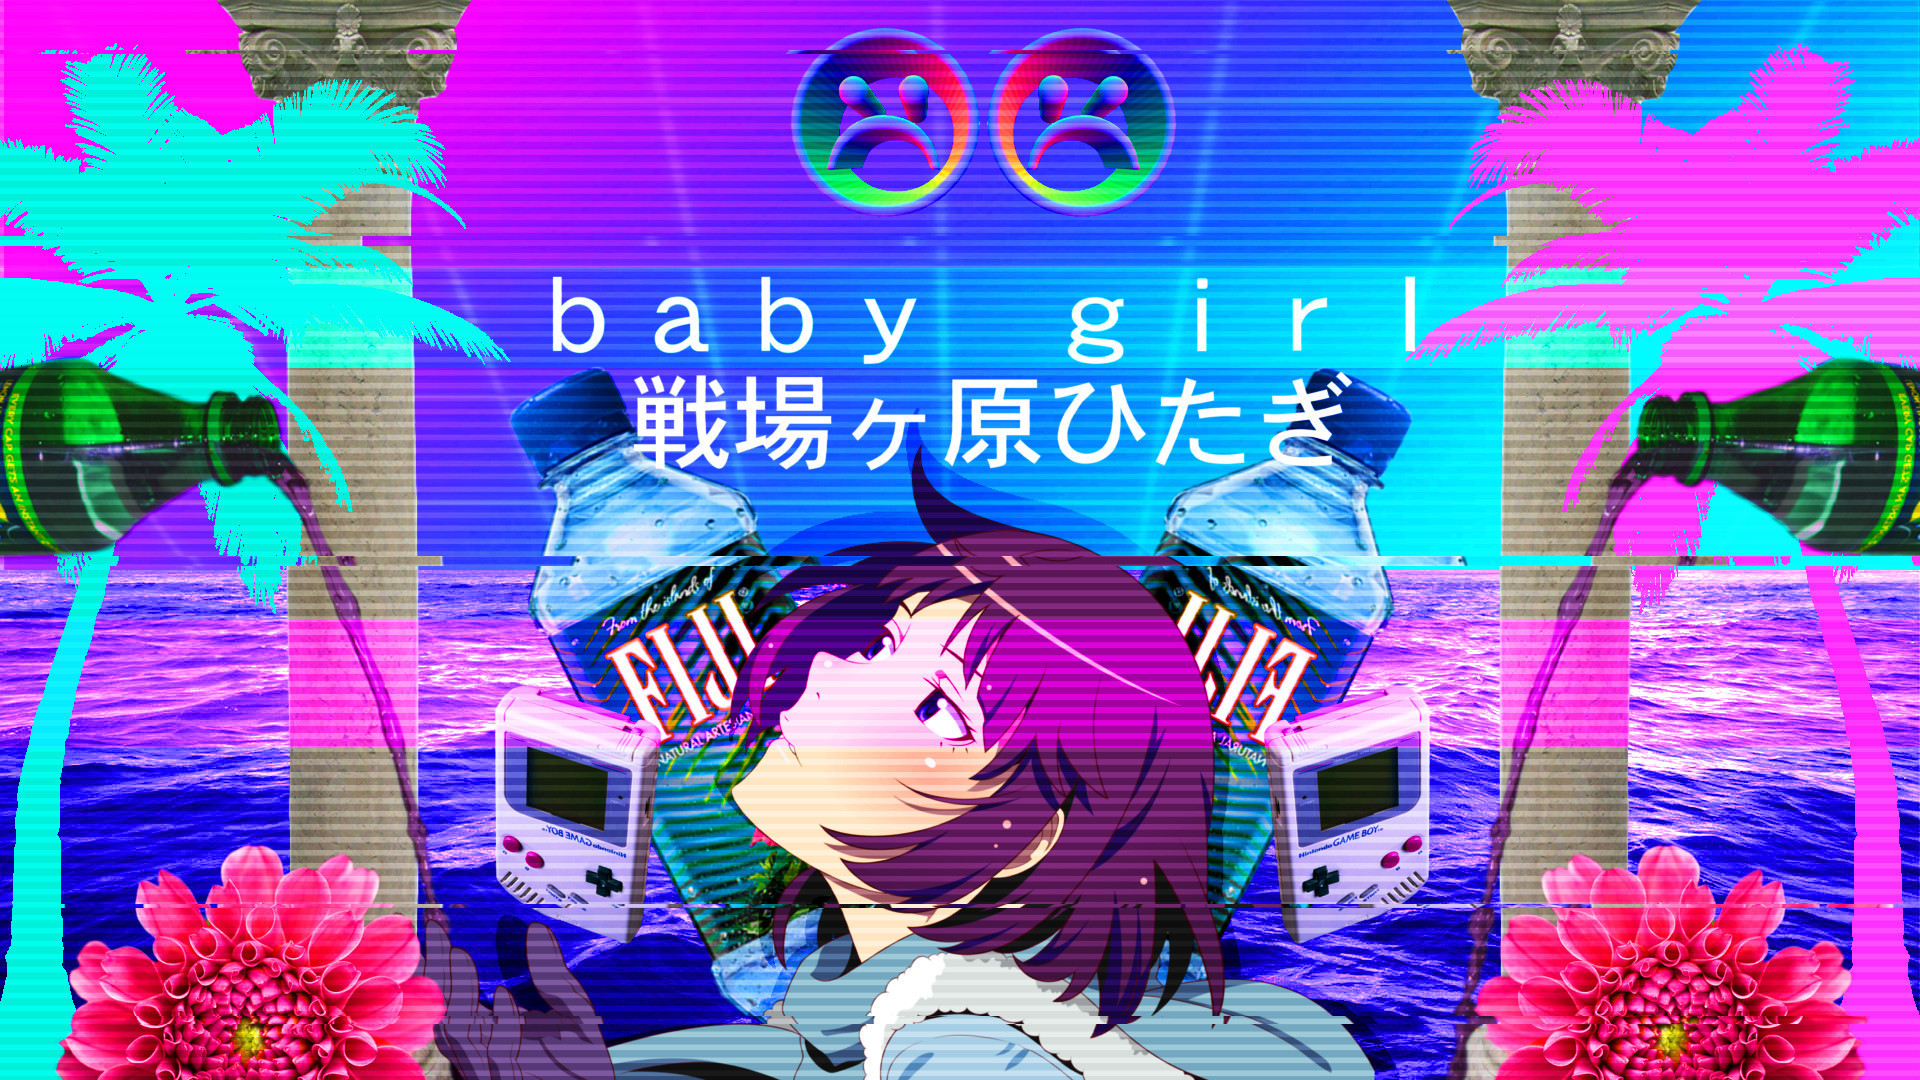 1920x1080 My Anime Vaporwave Wallpaper #02 by iamthebest052